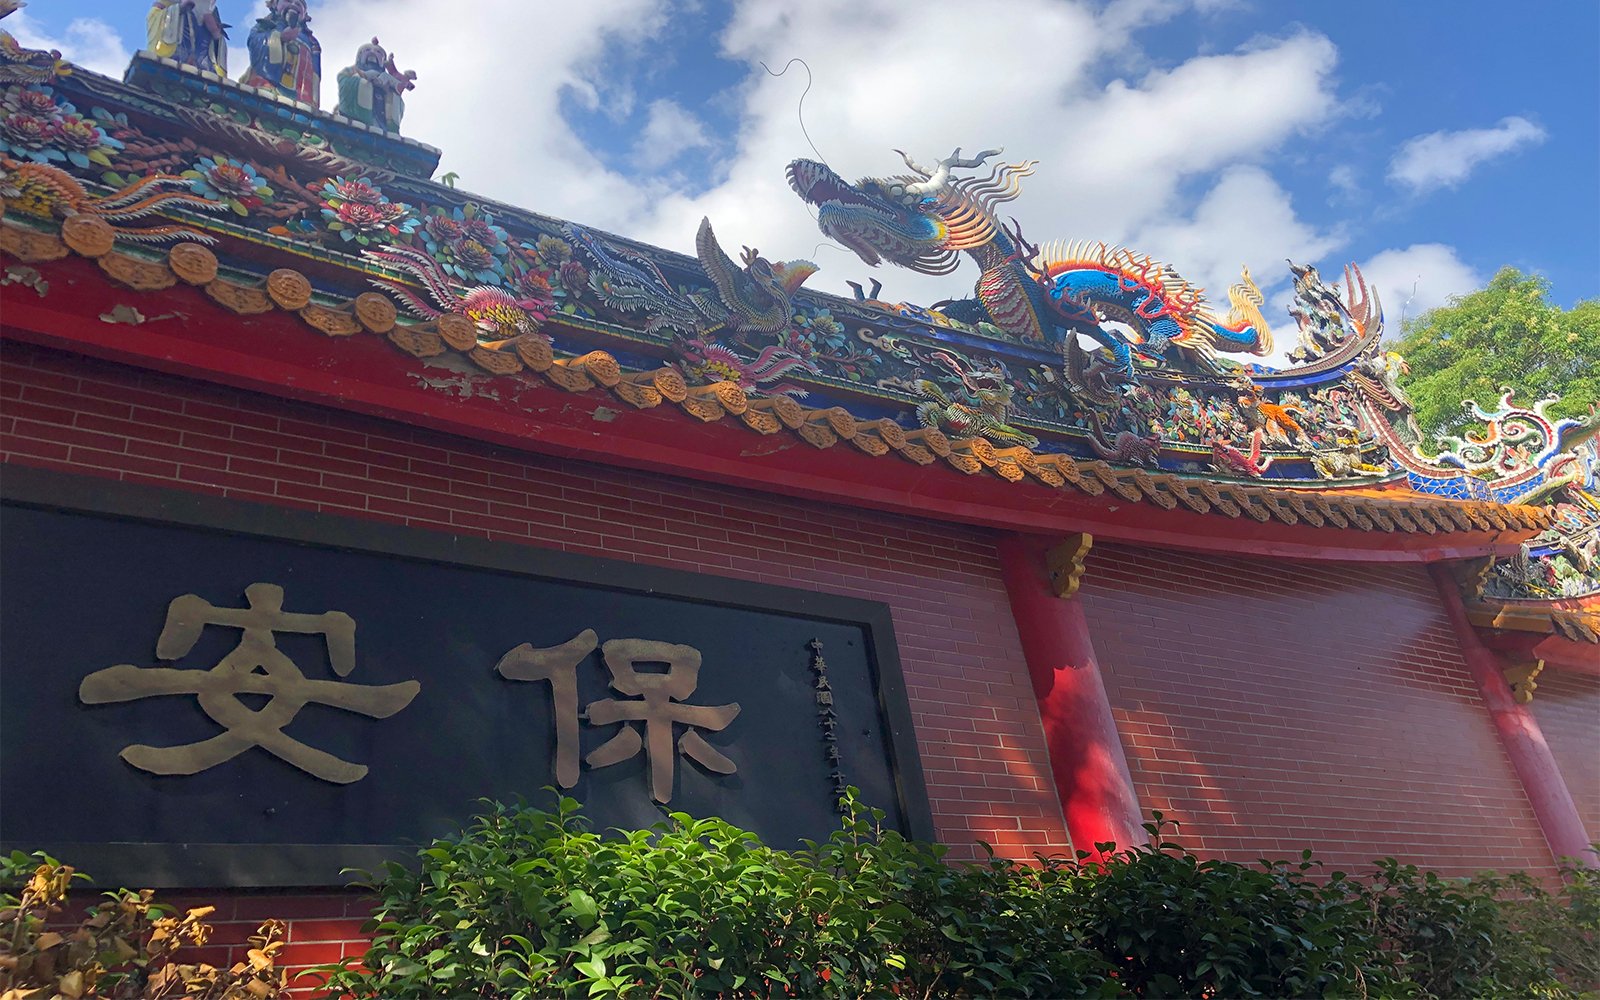 Colorful red brick wall with sculptures of dragon and people on roof